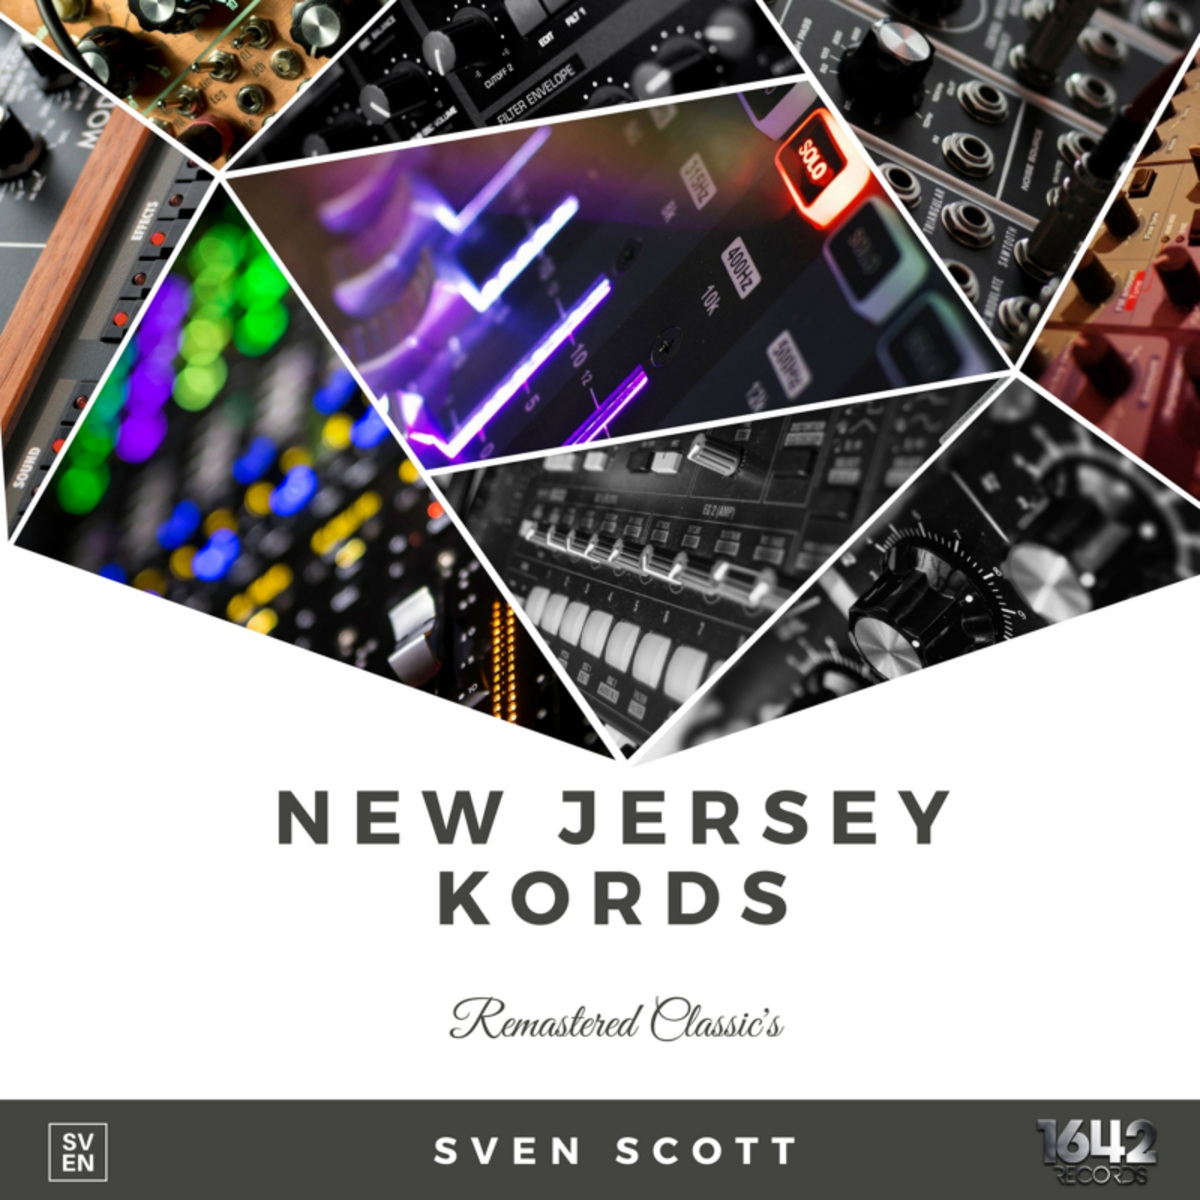 Sven Scott - New Jersey Kords (Remastered Classic's) / 1642 Records